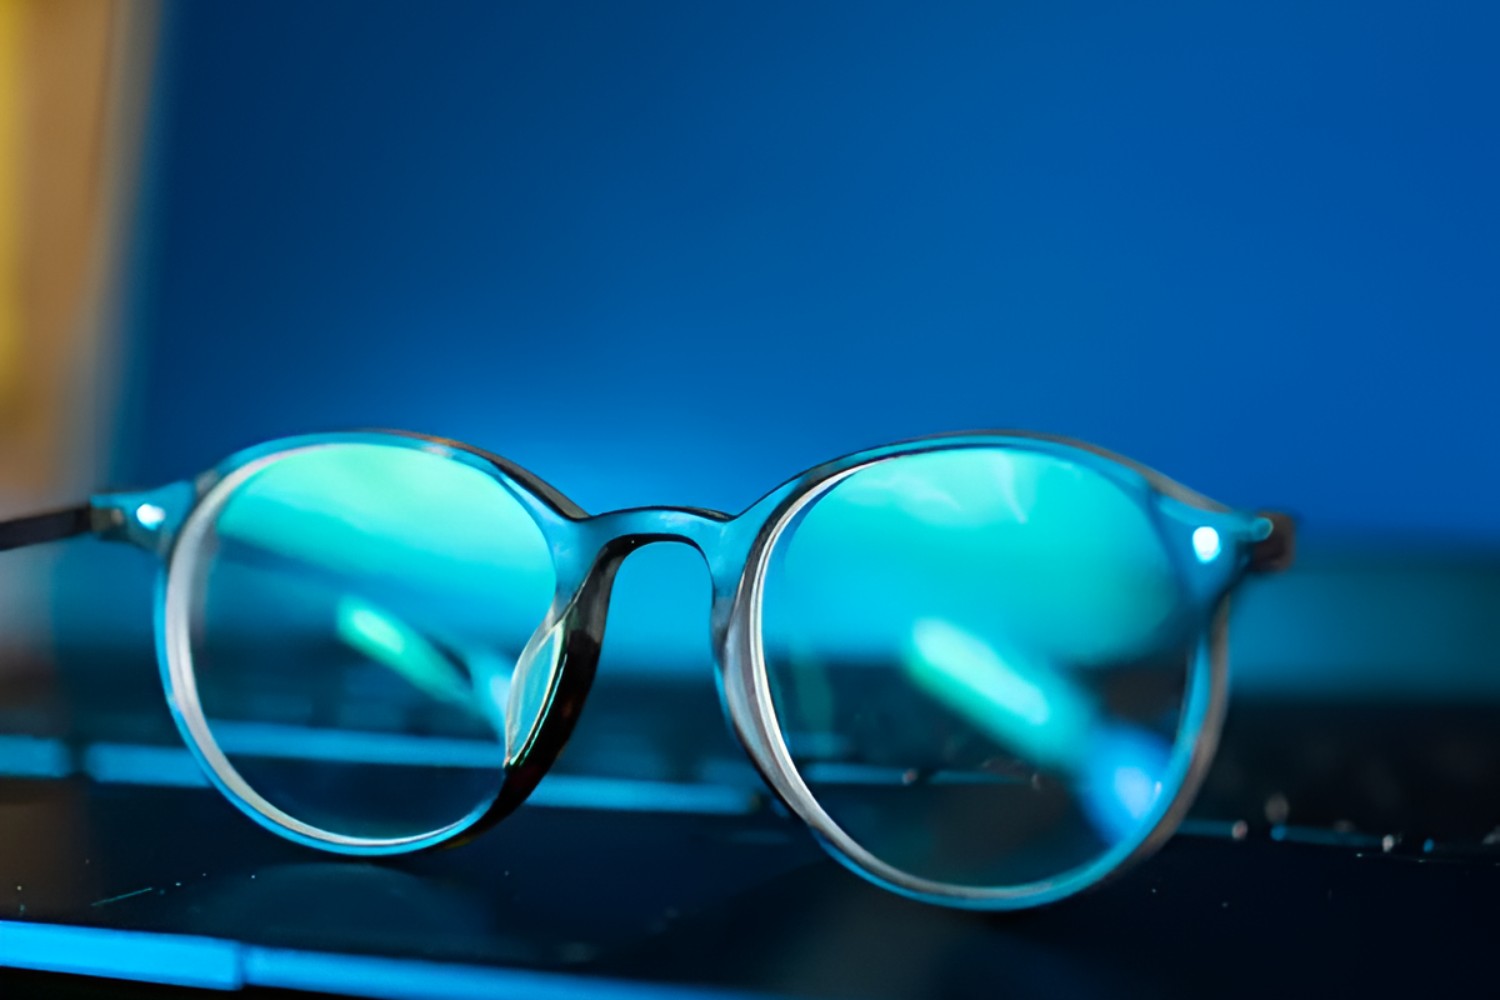 Verifying Protection: Methods To Check If Your Glasses Block Blue Light